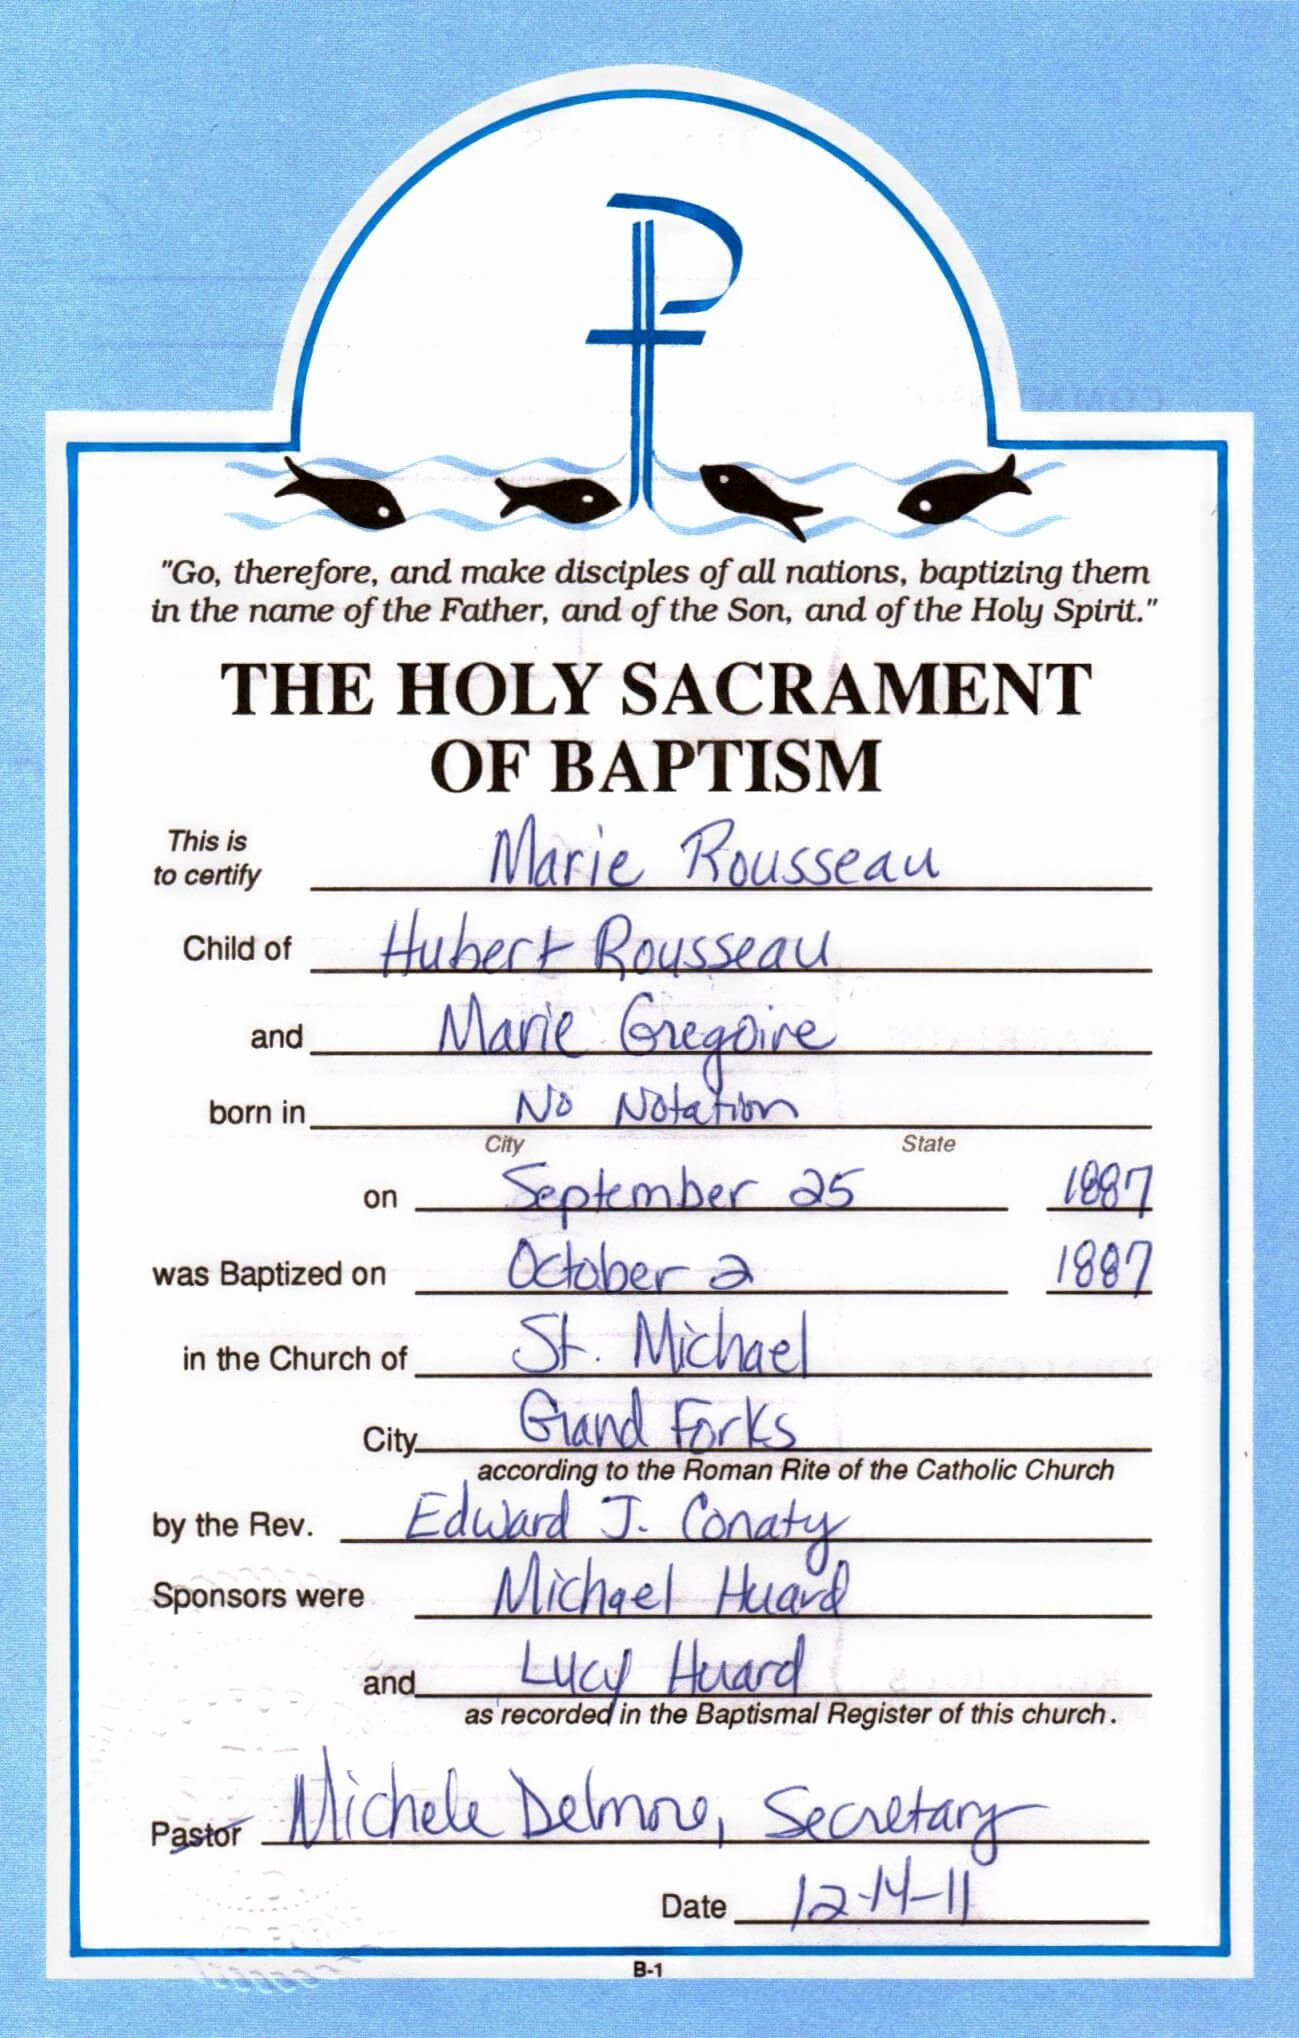 B6D4E Certificate Of Baptism Template | Wiring Resources Pertaining To Baby Christening Certificate Template